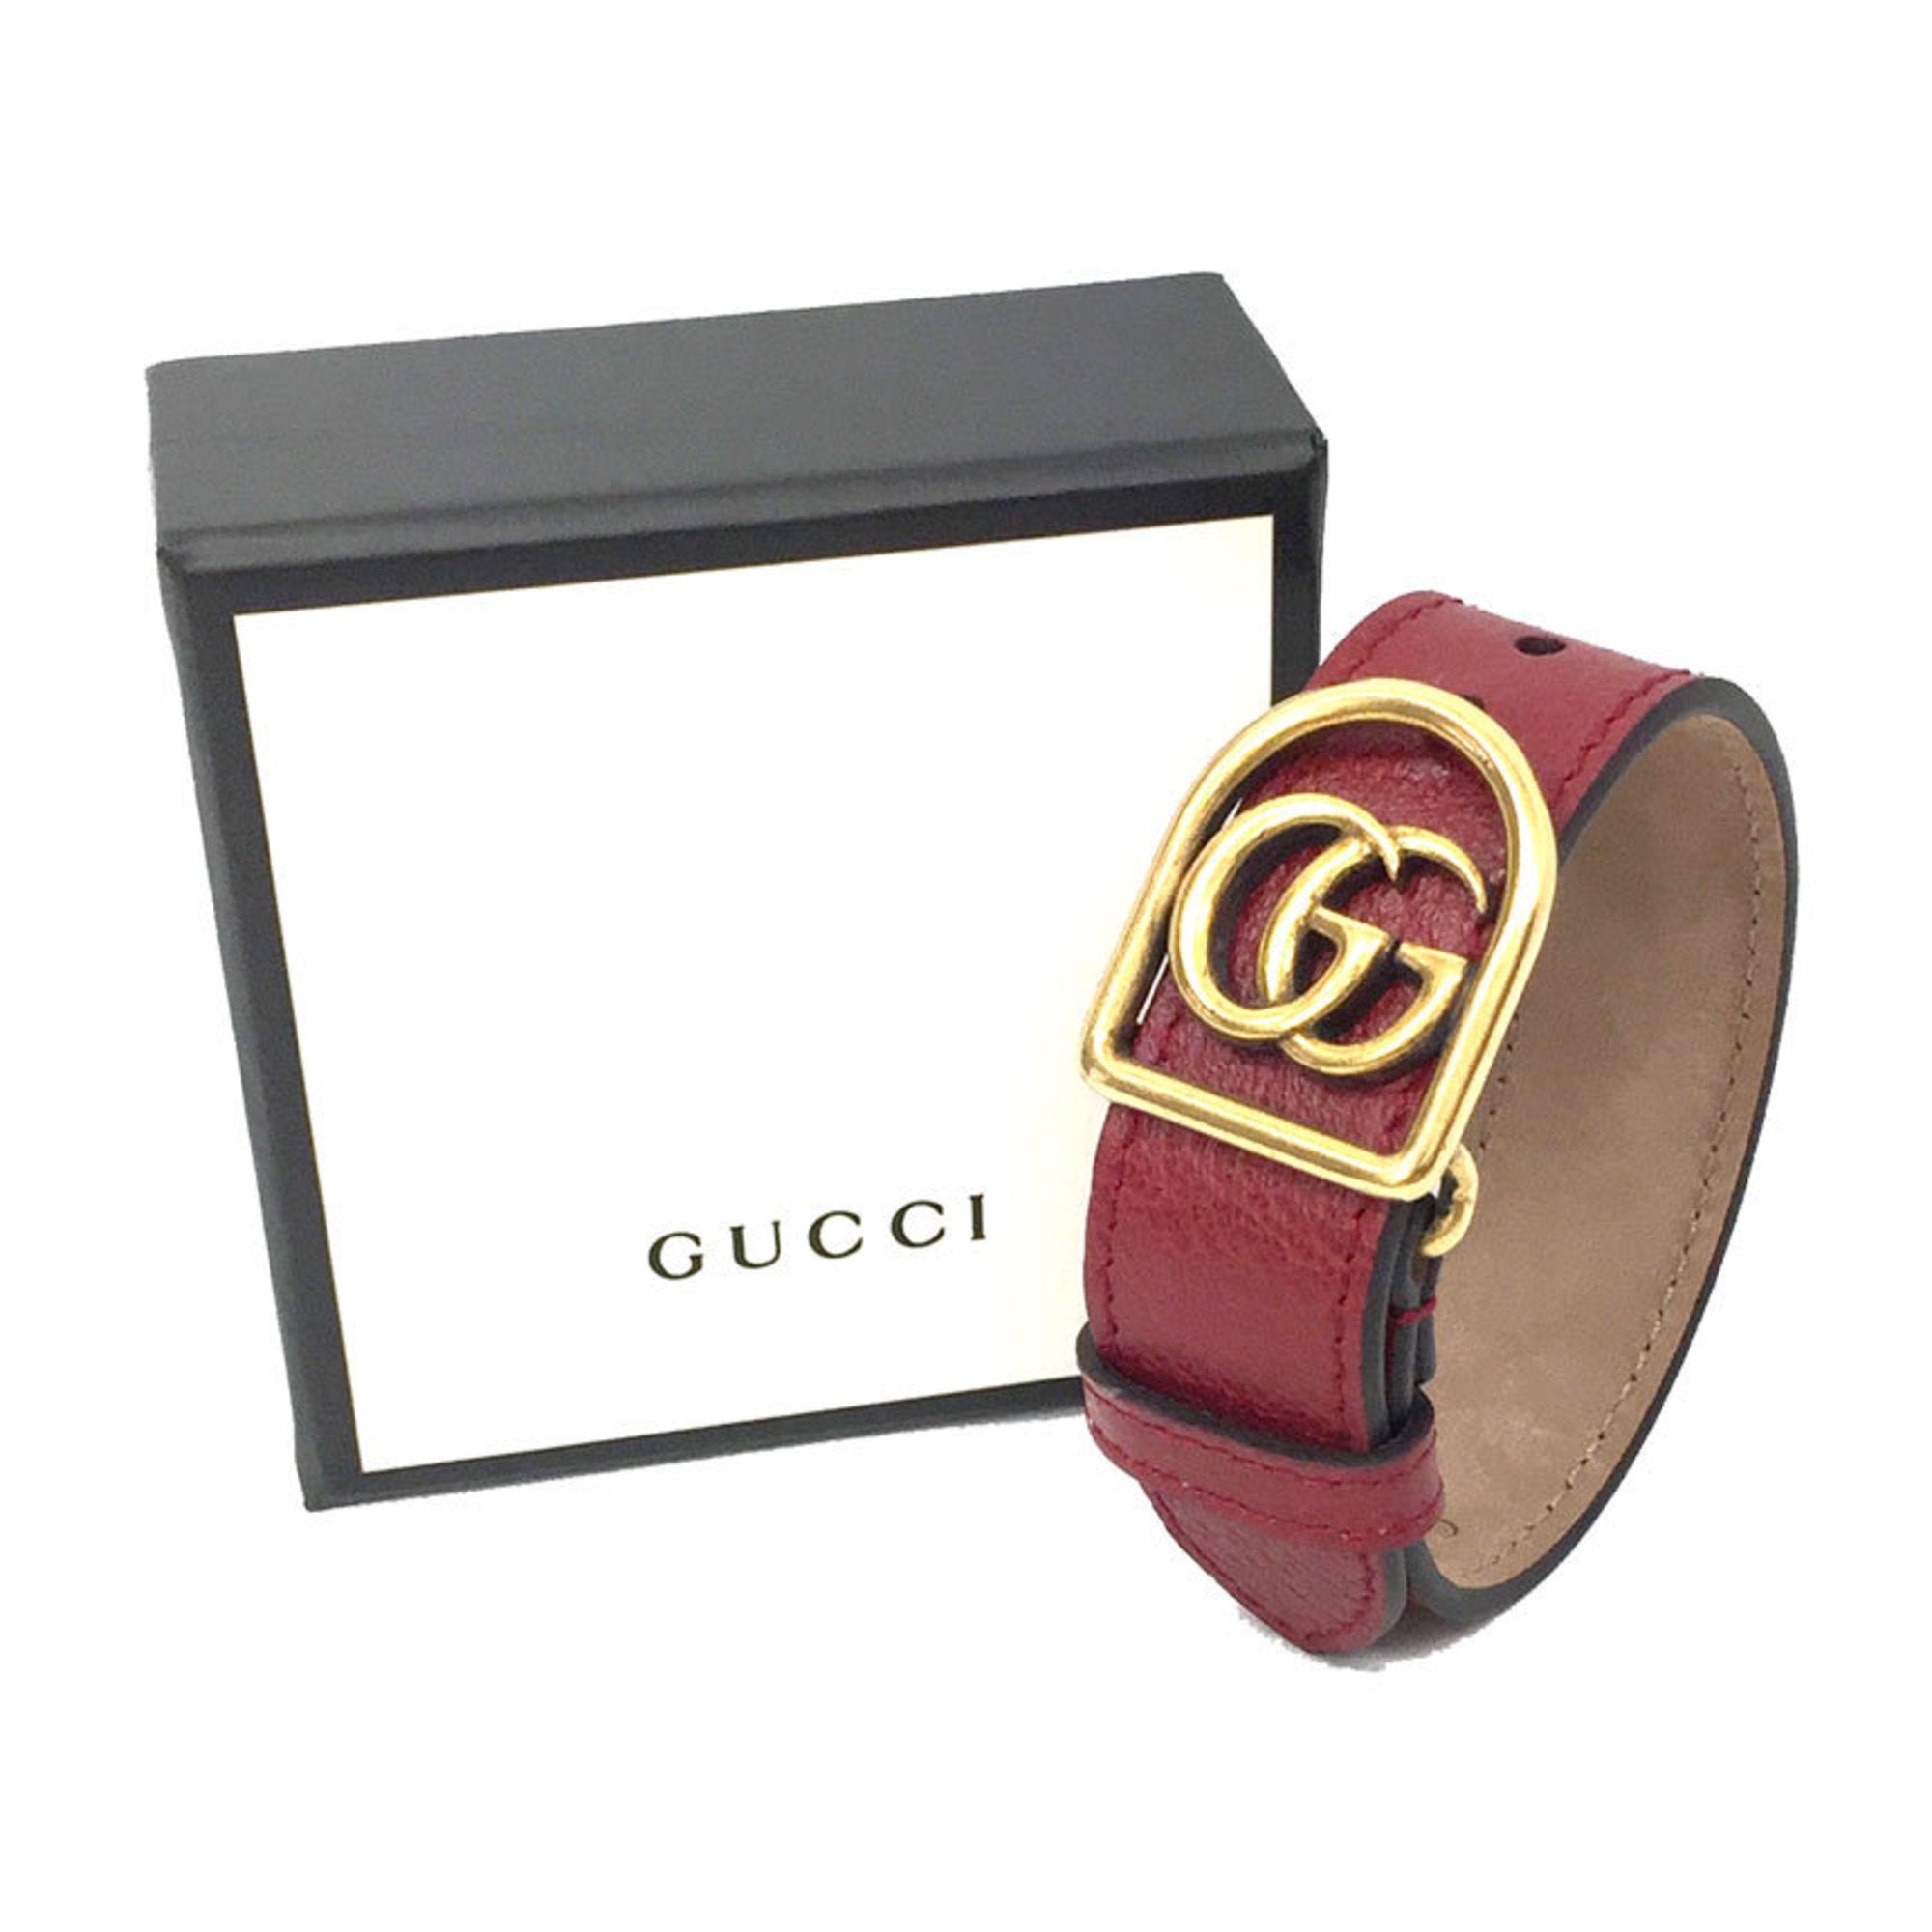 Gucci Marmont Double G Leather Bracelet  Rent Gucci jewelry for 55month